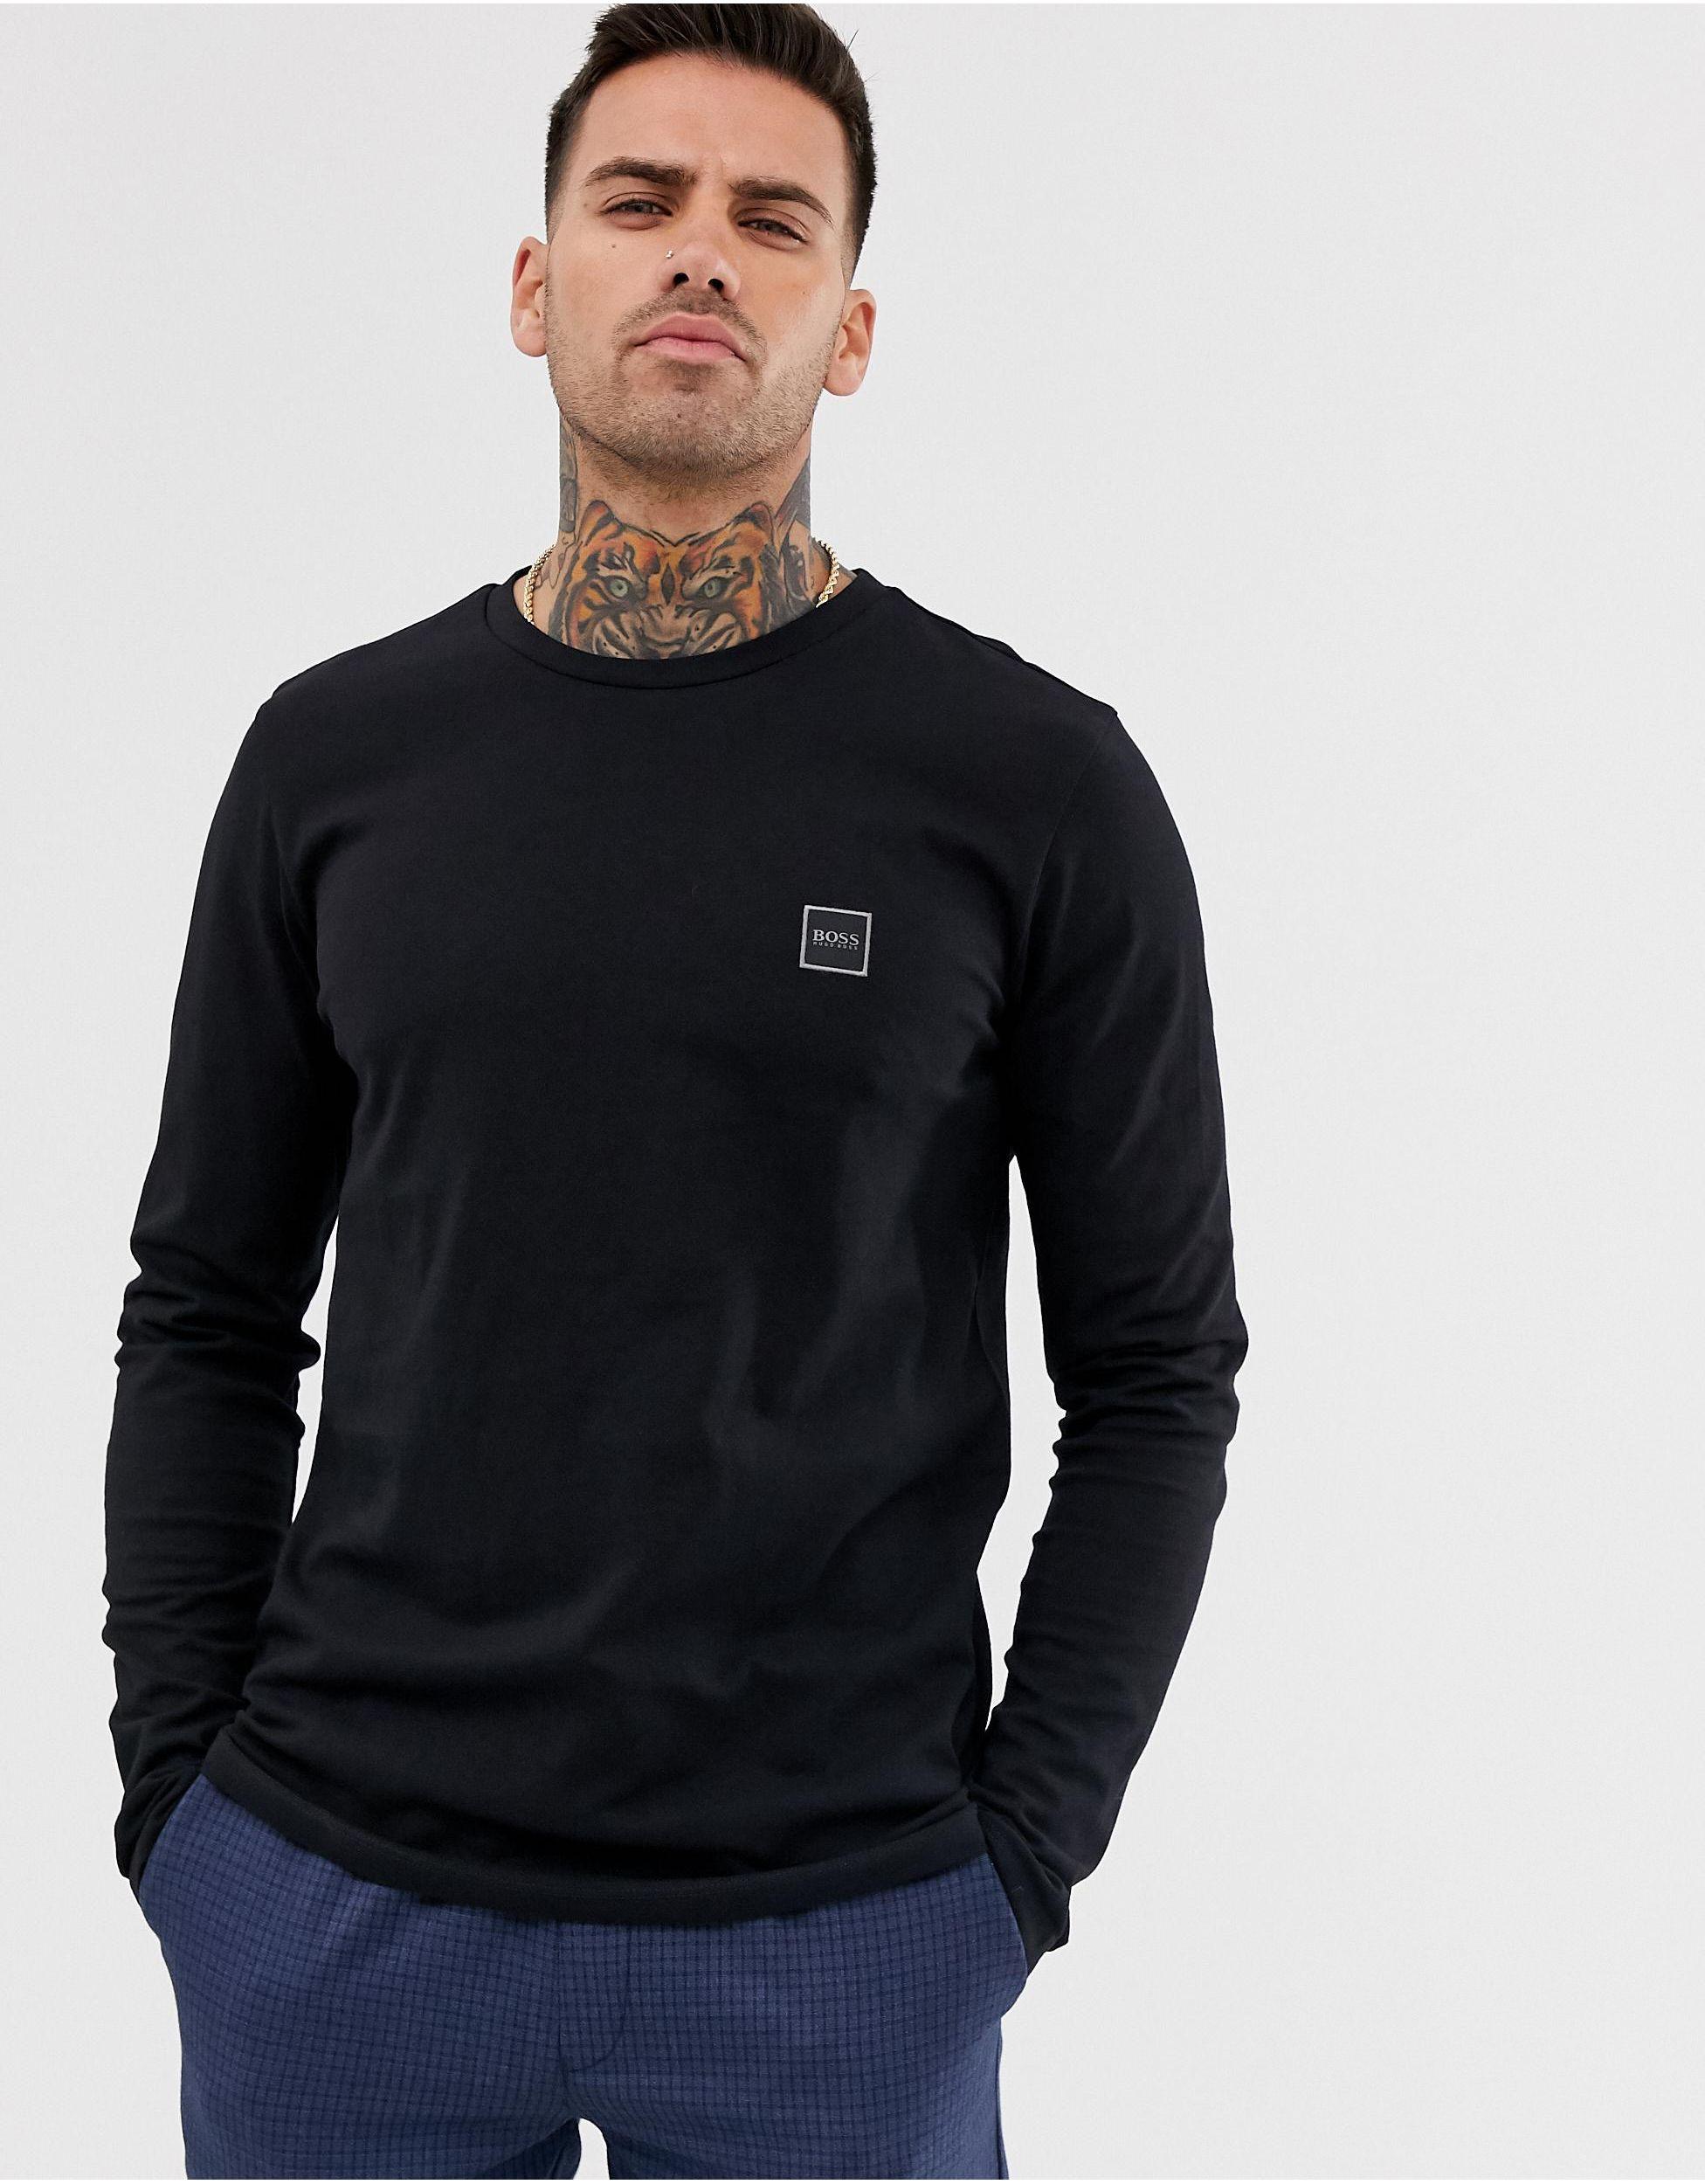 stitch monthly punch BOSS by HUGO BOSS Tacks Box Logo Long Sleeve Top in Black for Men | Lyst